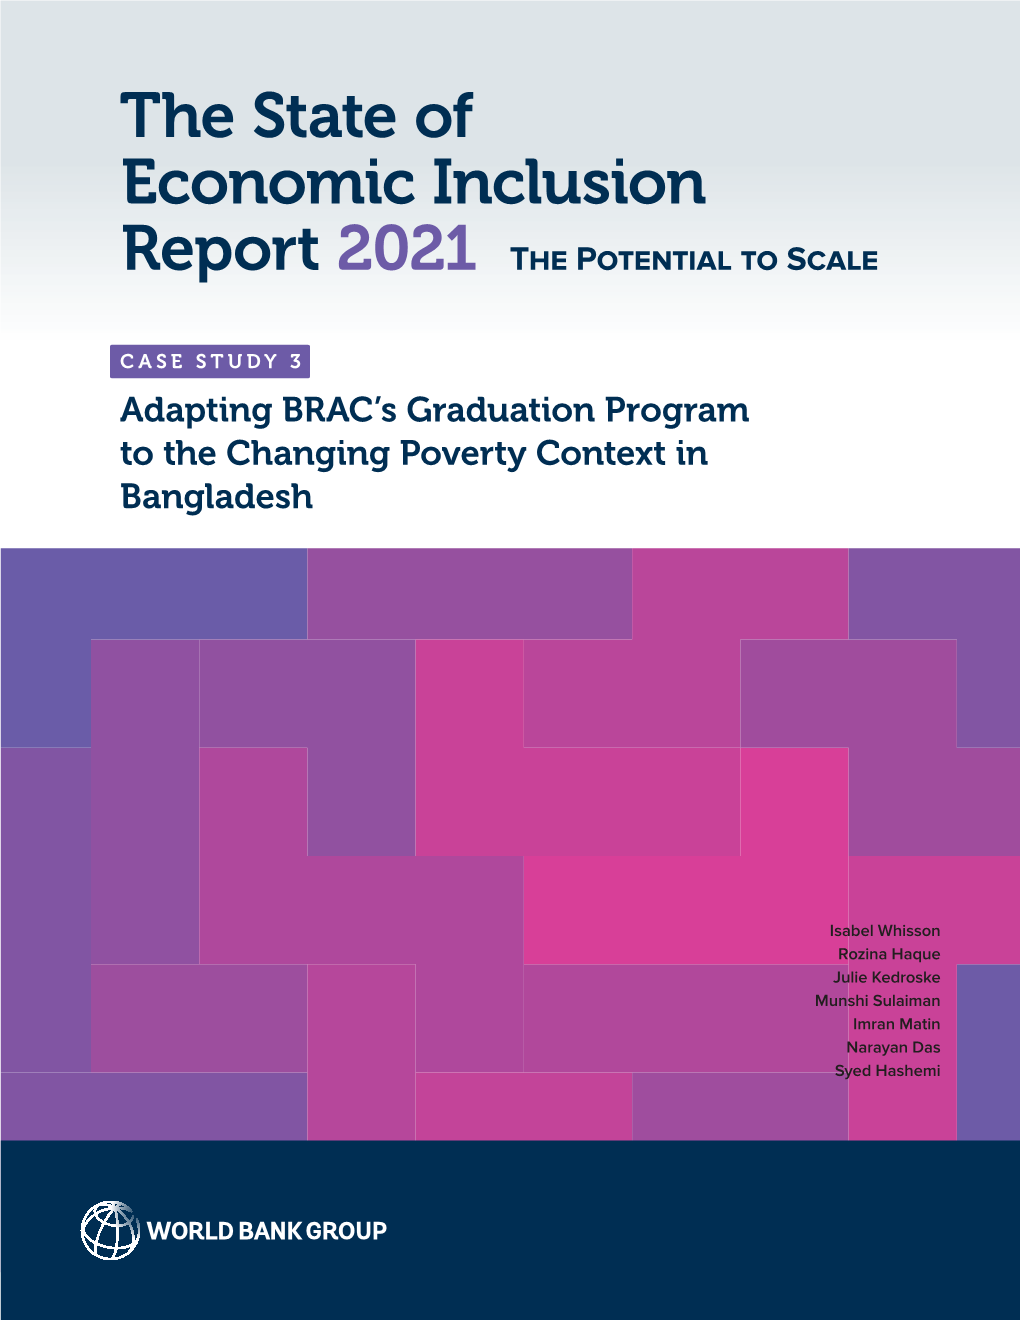 Case Study 3: Adapting Brac’S Graduation Program to the Changing Poverty Context in Bangladesh